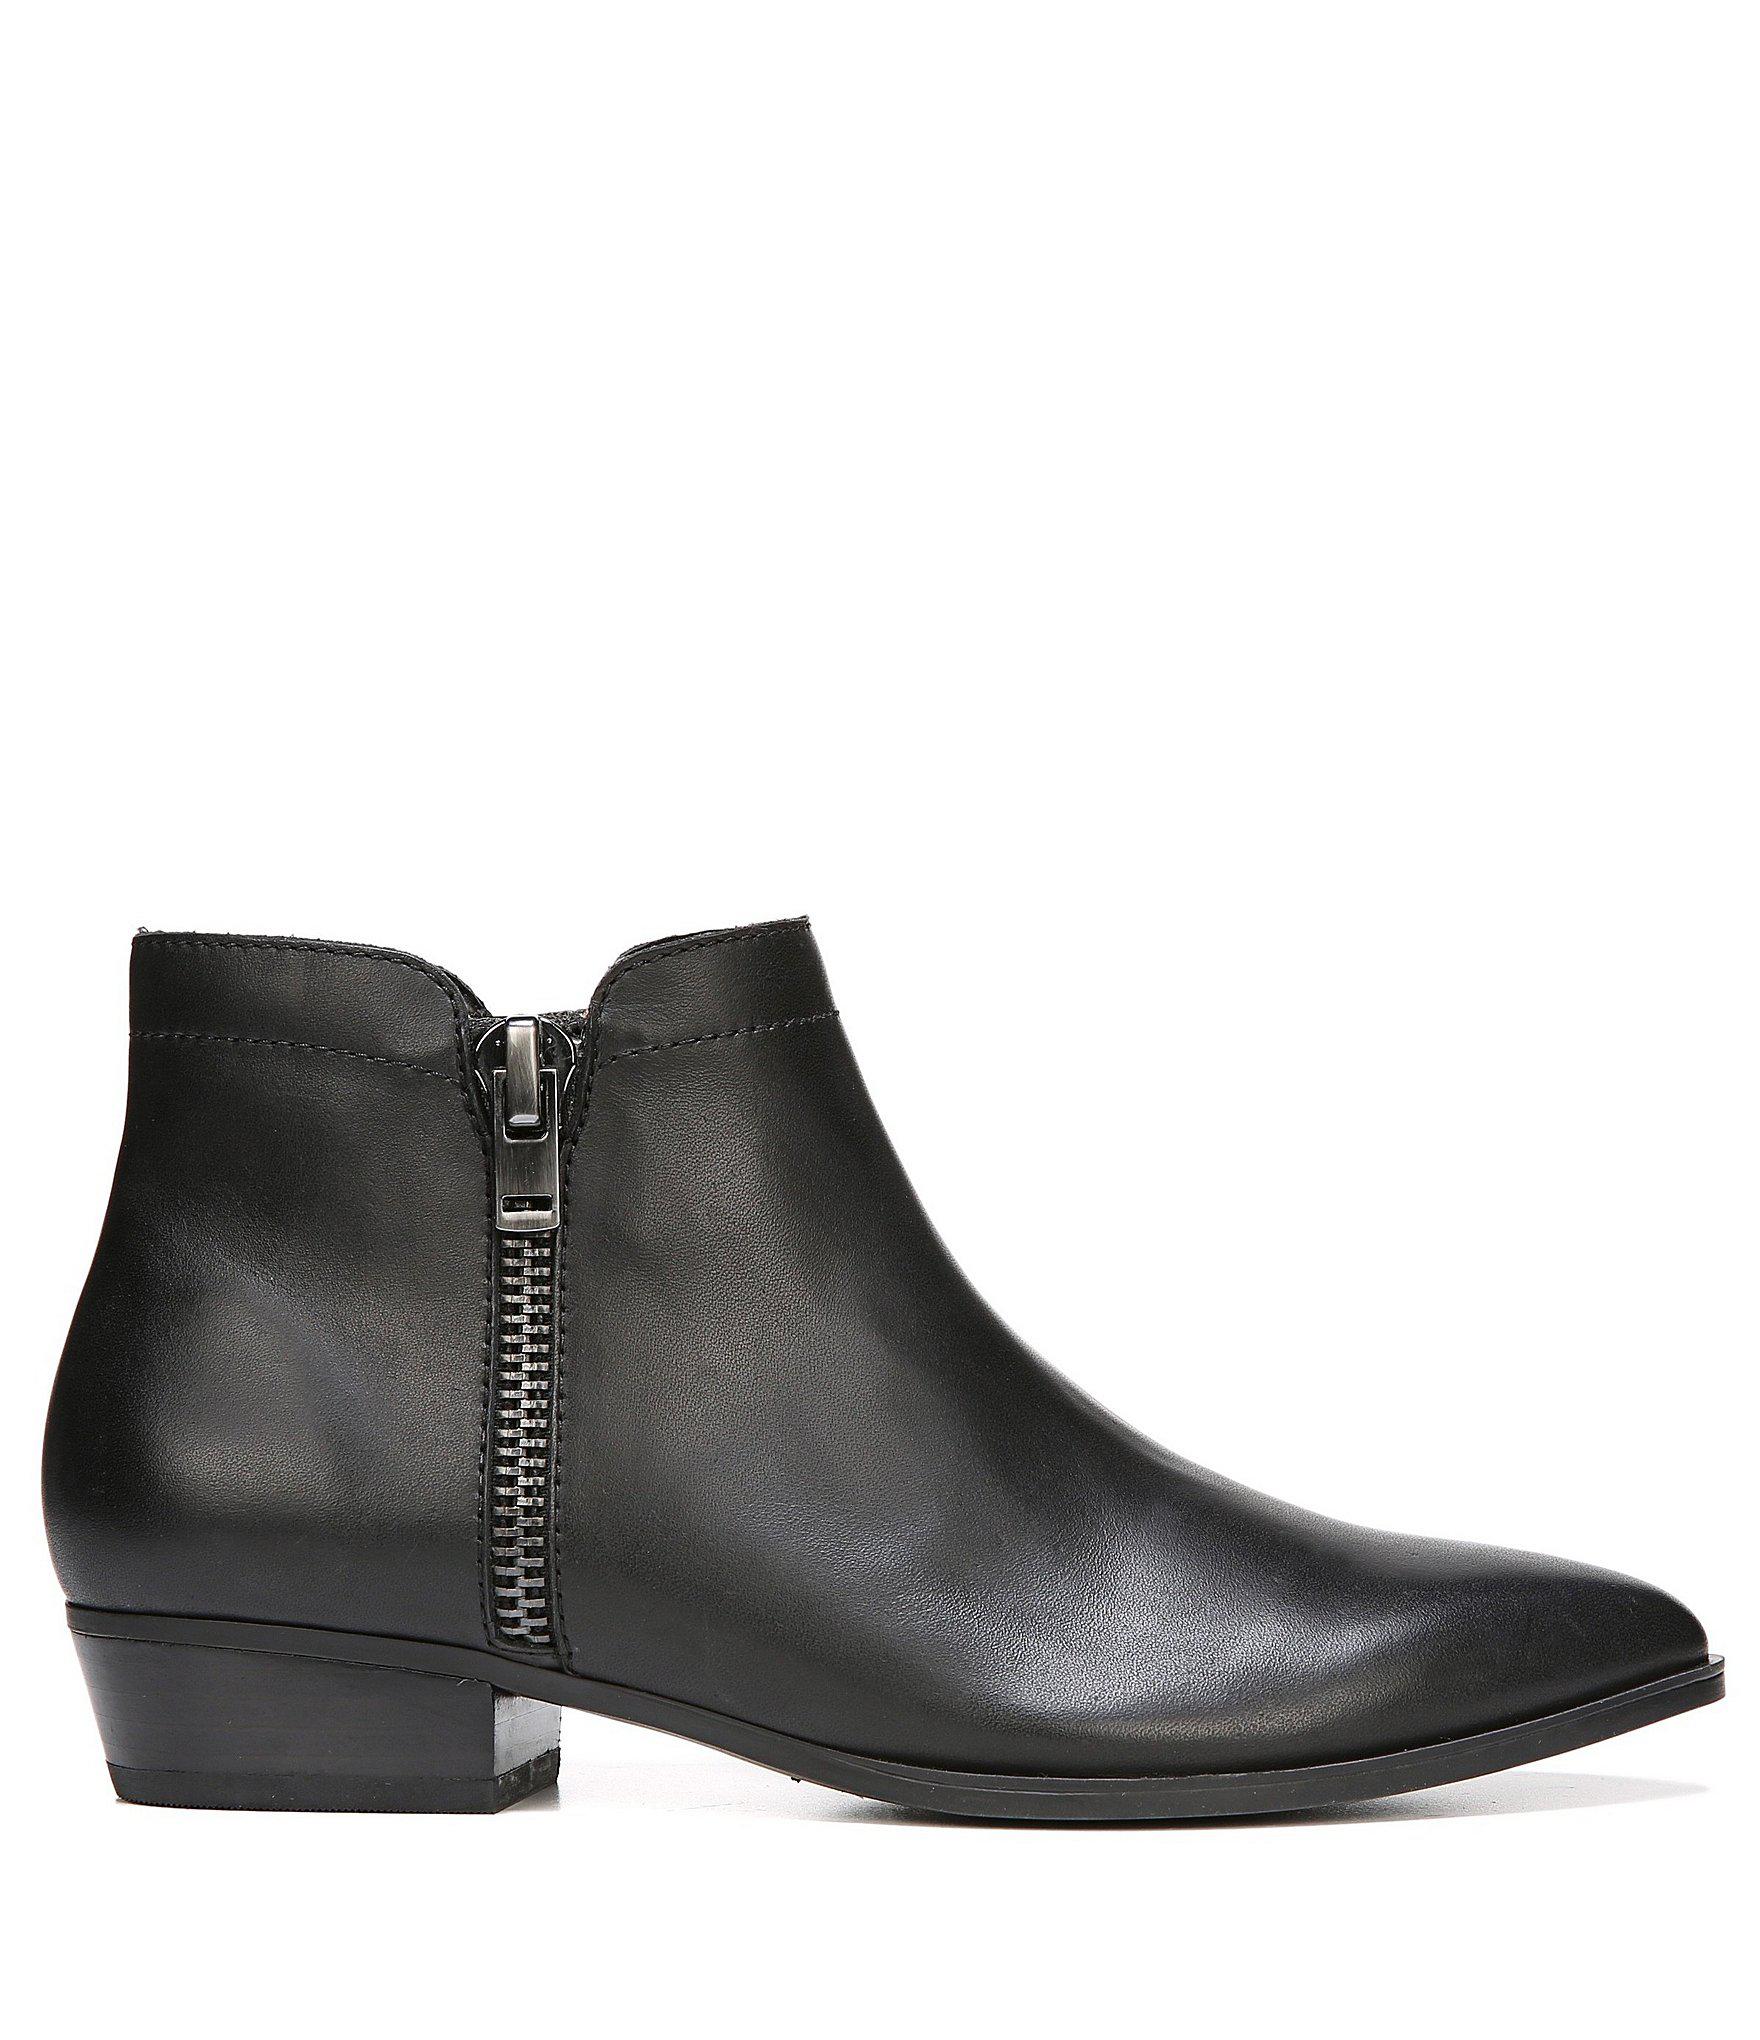 Naturalizer Blair Leather Booties in Soft Marble (Black) - Lyst